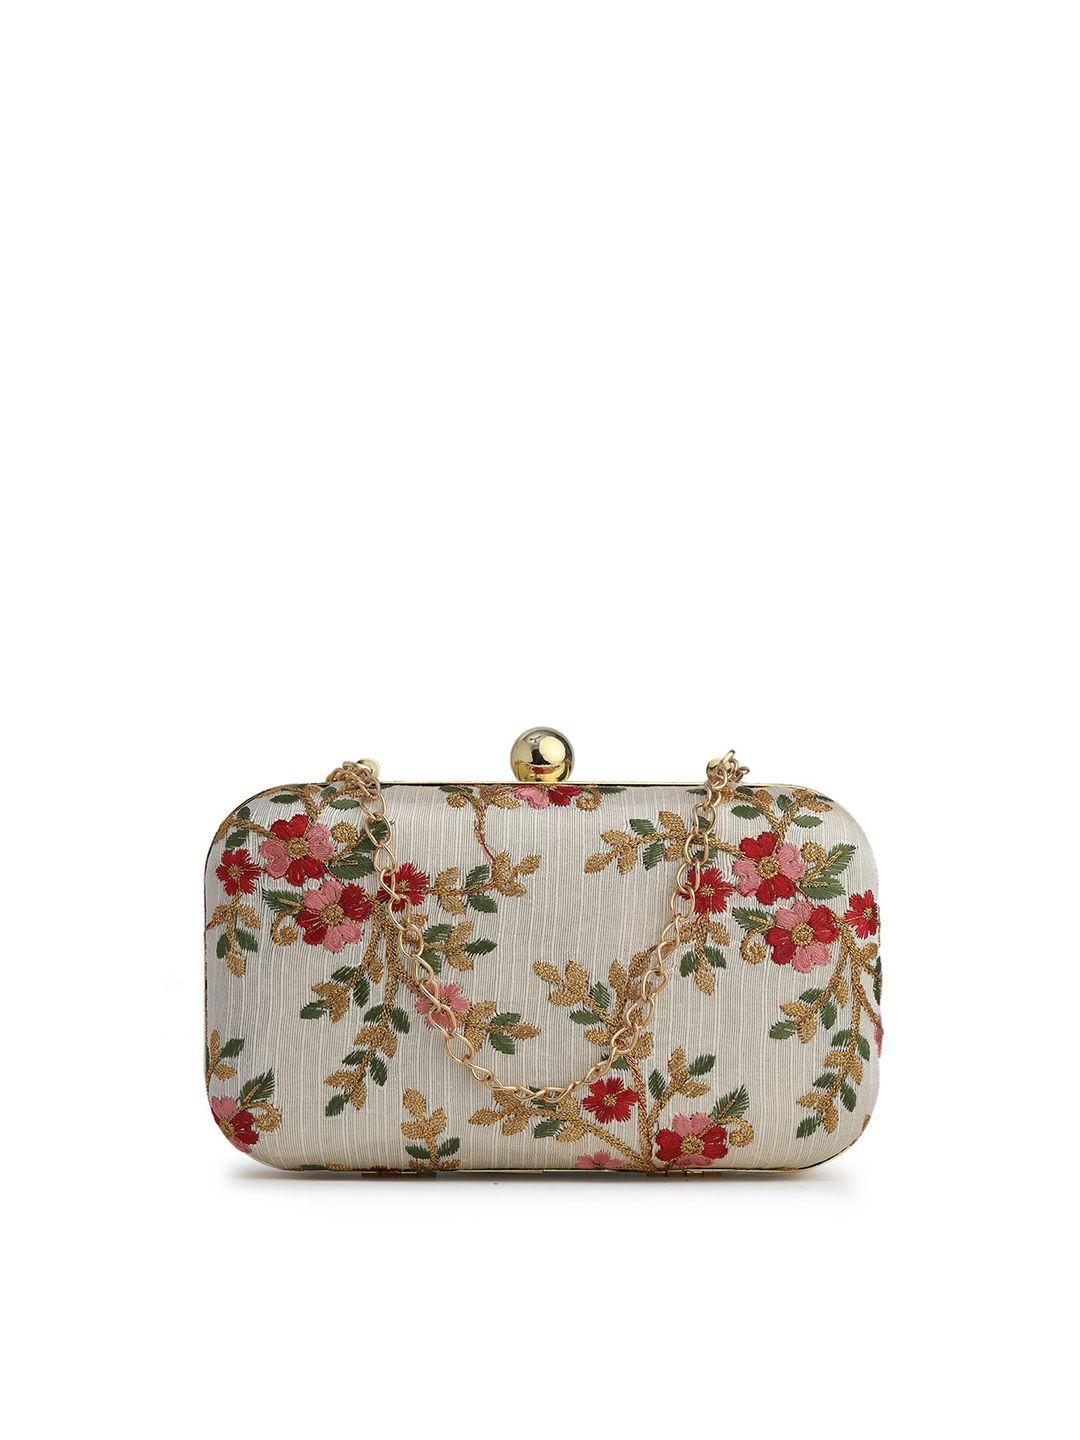 gaura pakhi off white & pink embroidered box clutch